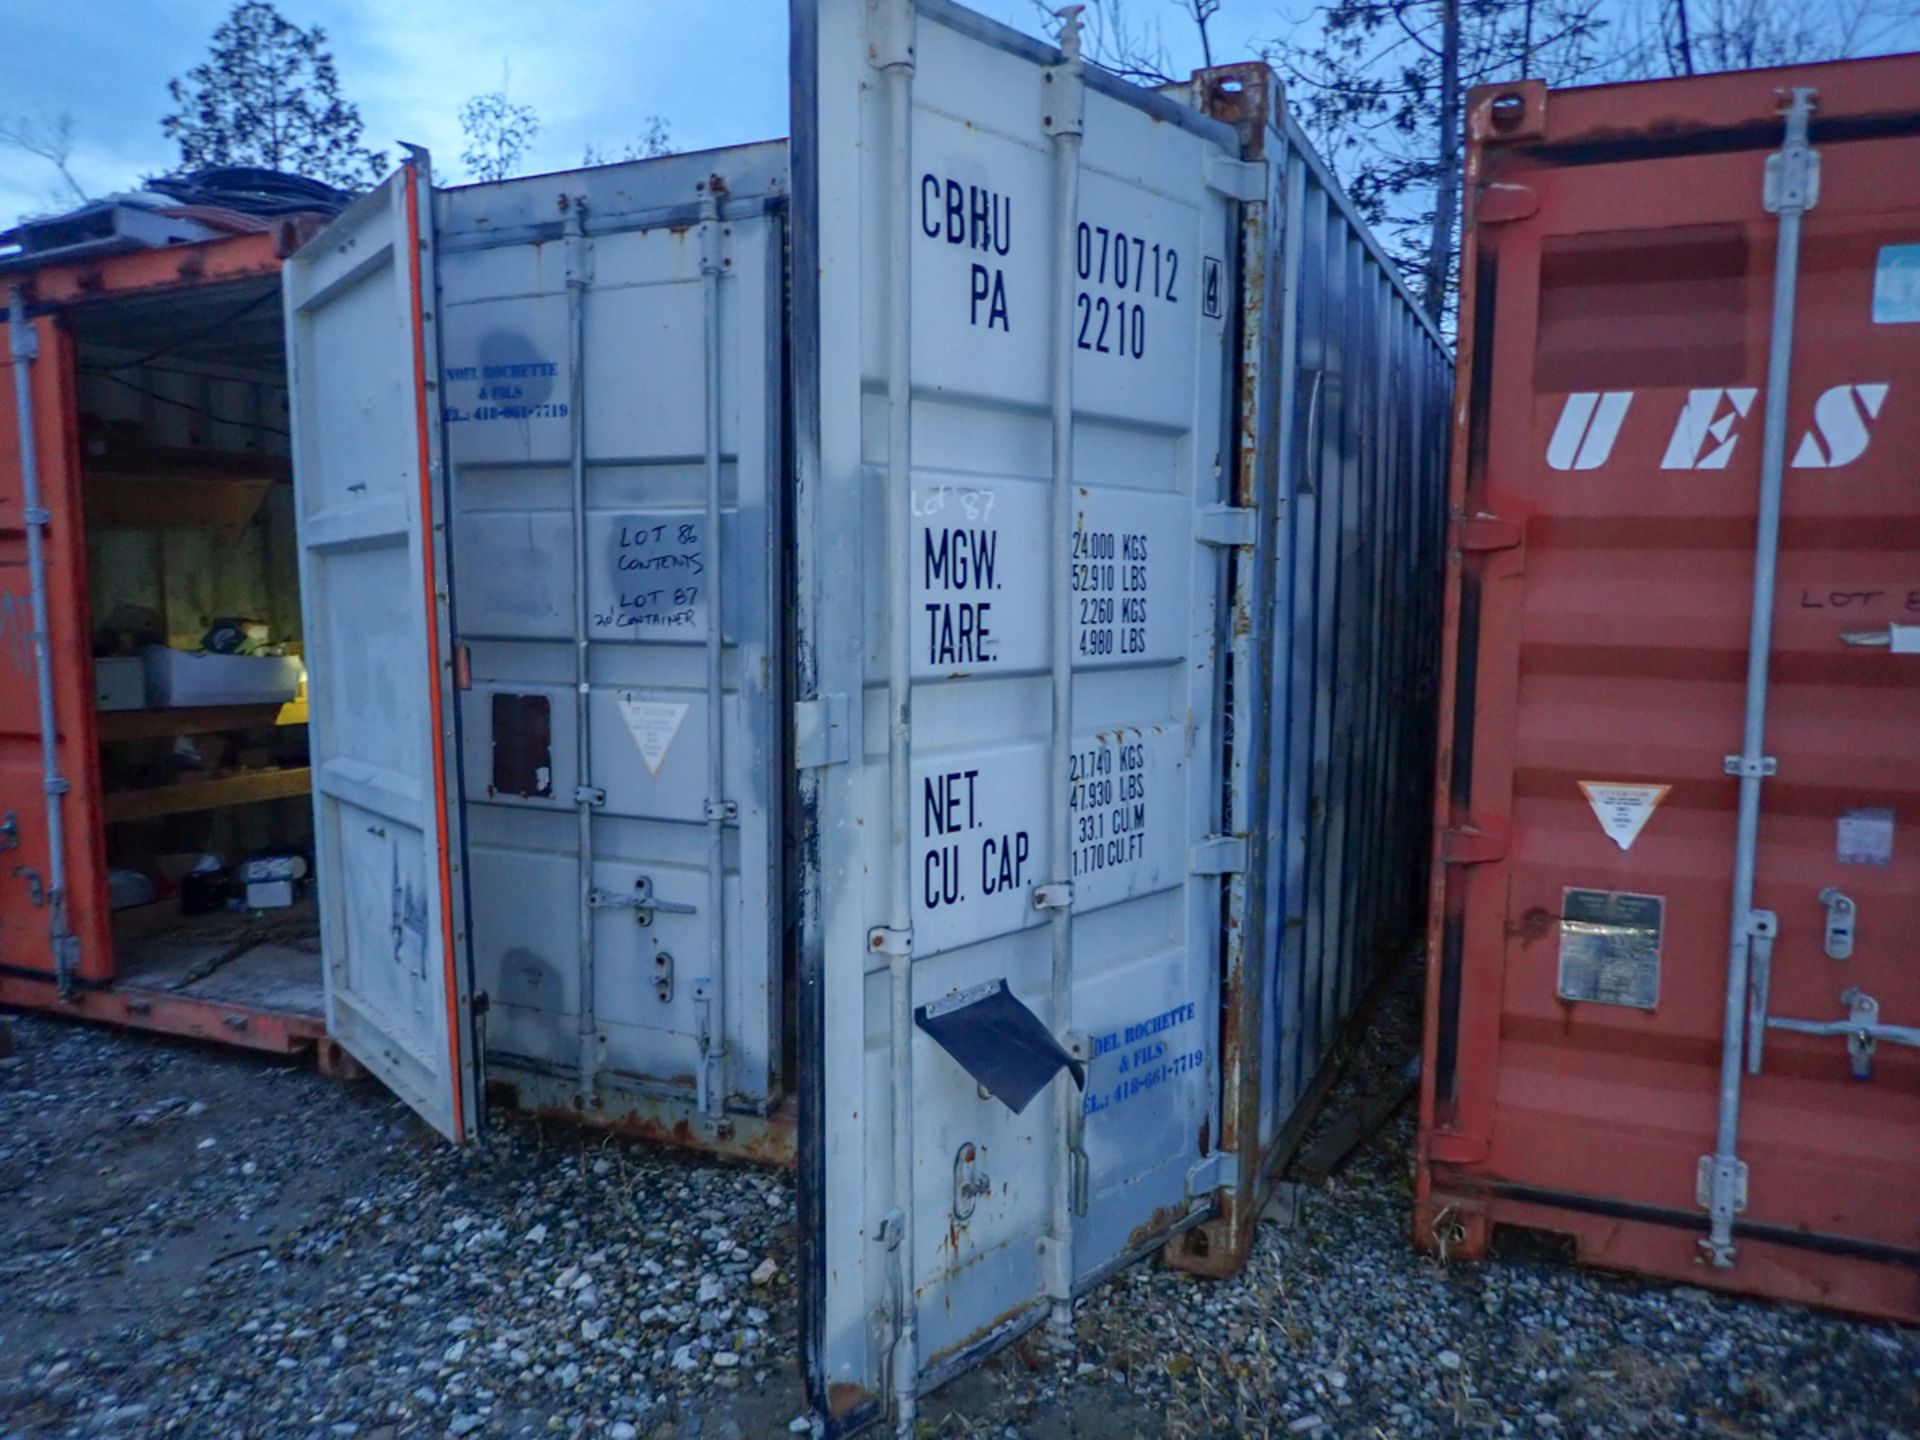 SHERBROOKE: 20' SHIPPING CONTAINER / CONTENEUR MARITIME 20'